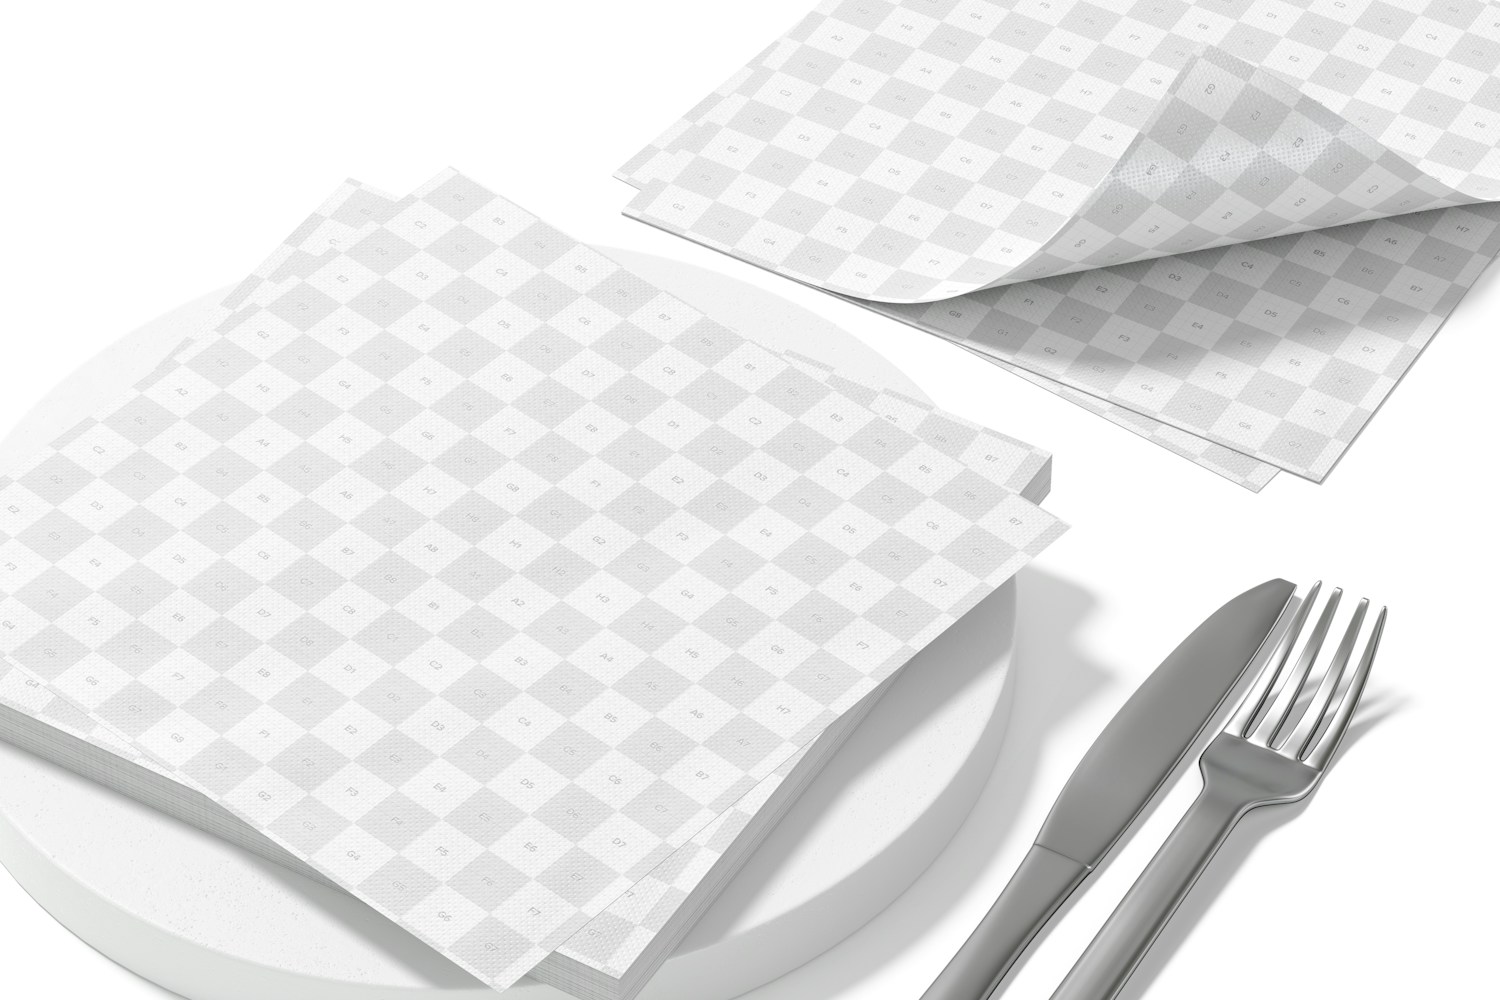 Paper Napkins Mockup, Perspective View